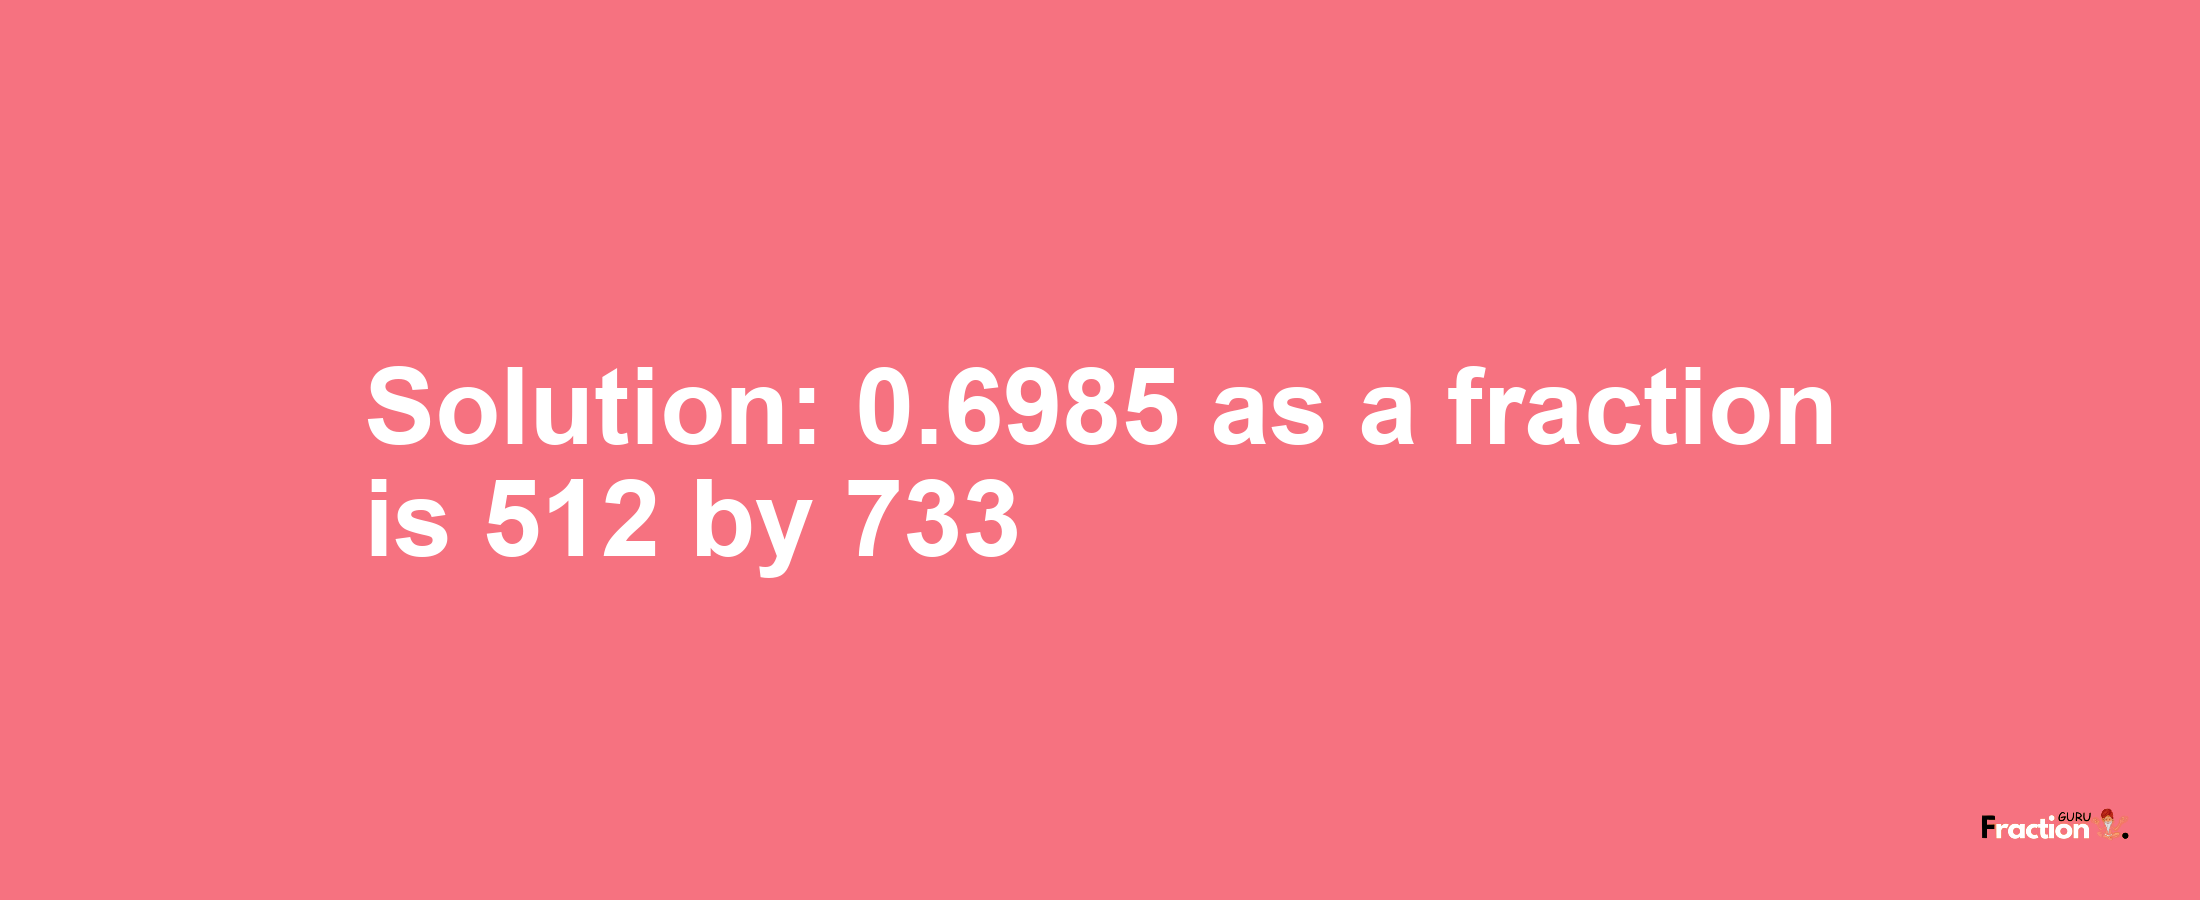 Solution:0.6985 as a fraction is 512/733